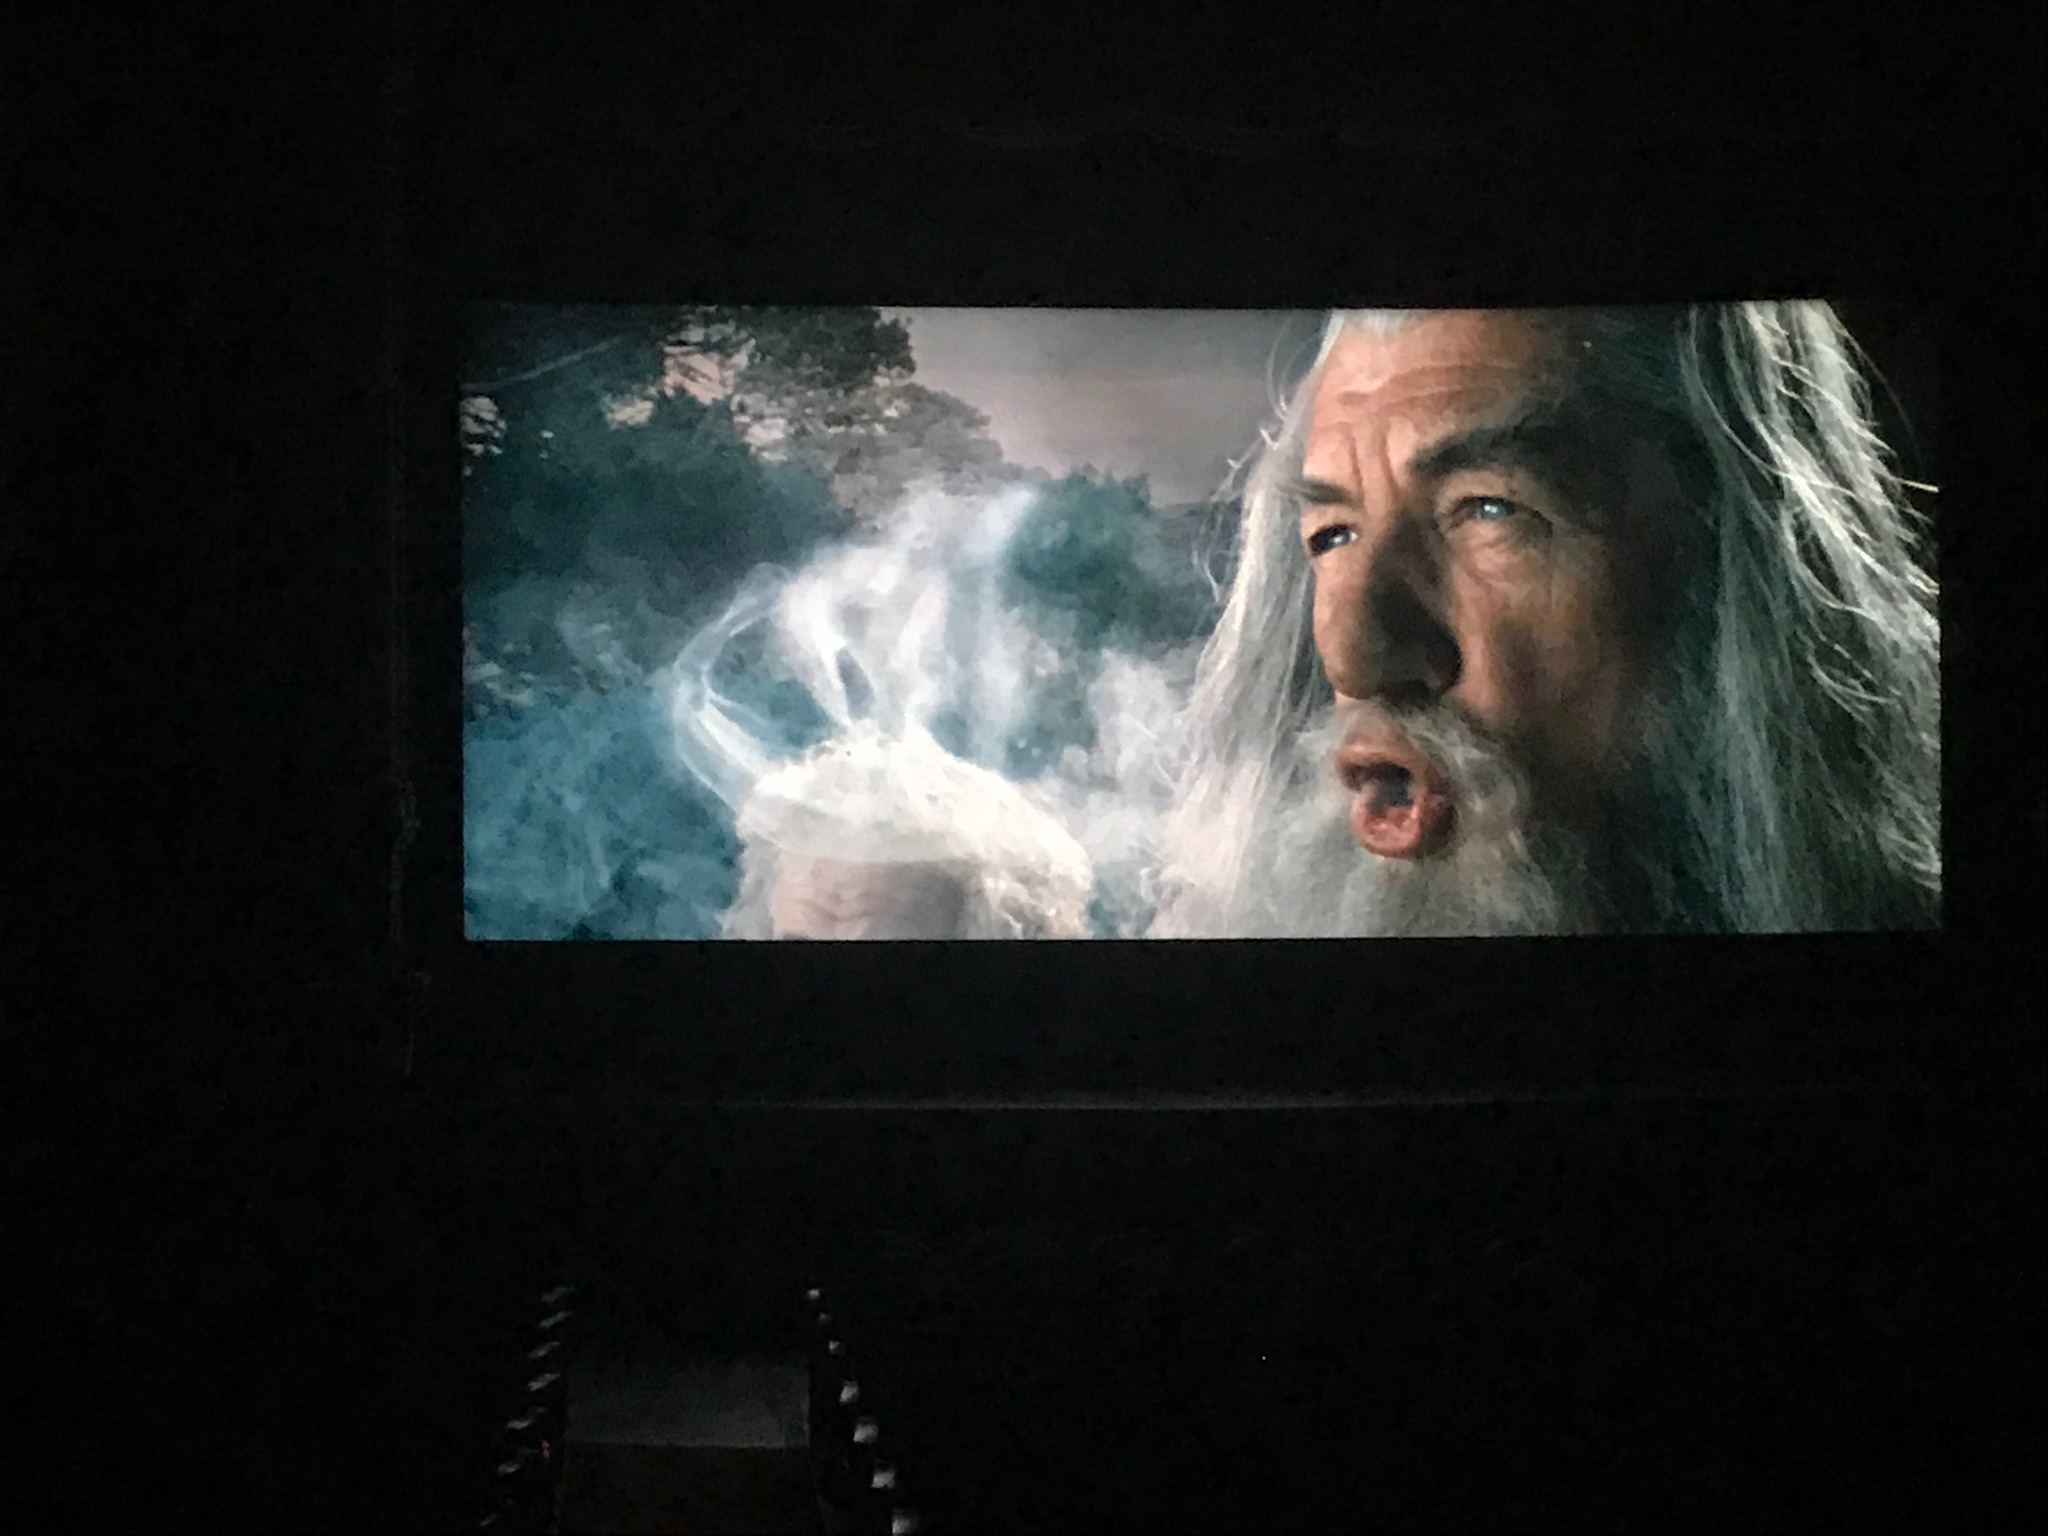 Music Box Theatre on Twitter: "Busy morning checking our 35MM prints of LORD  OF THE RINGS Trilogy🎞📽 See them on the big screen this weekend! Get  Tickets Now: https://t.co/qfoQQeOwbI https://t.co/qeN5CYAEum" / Twitter